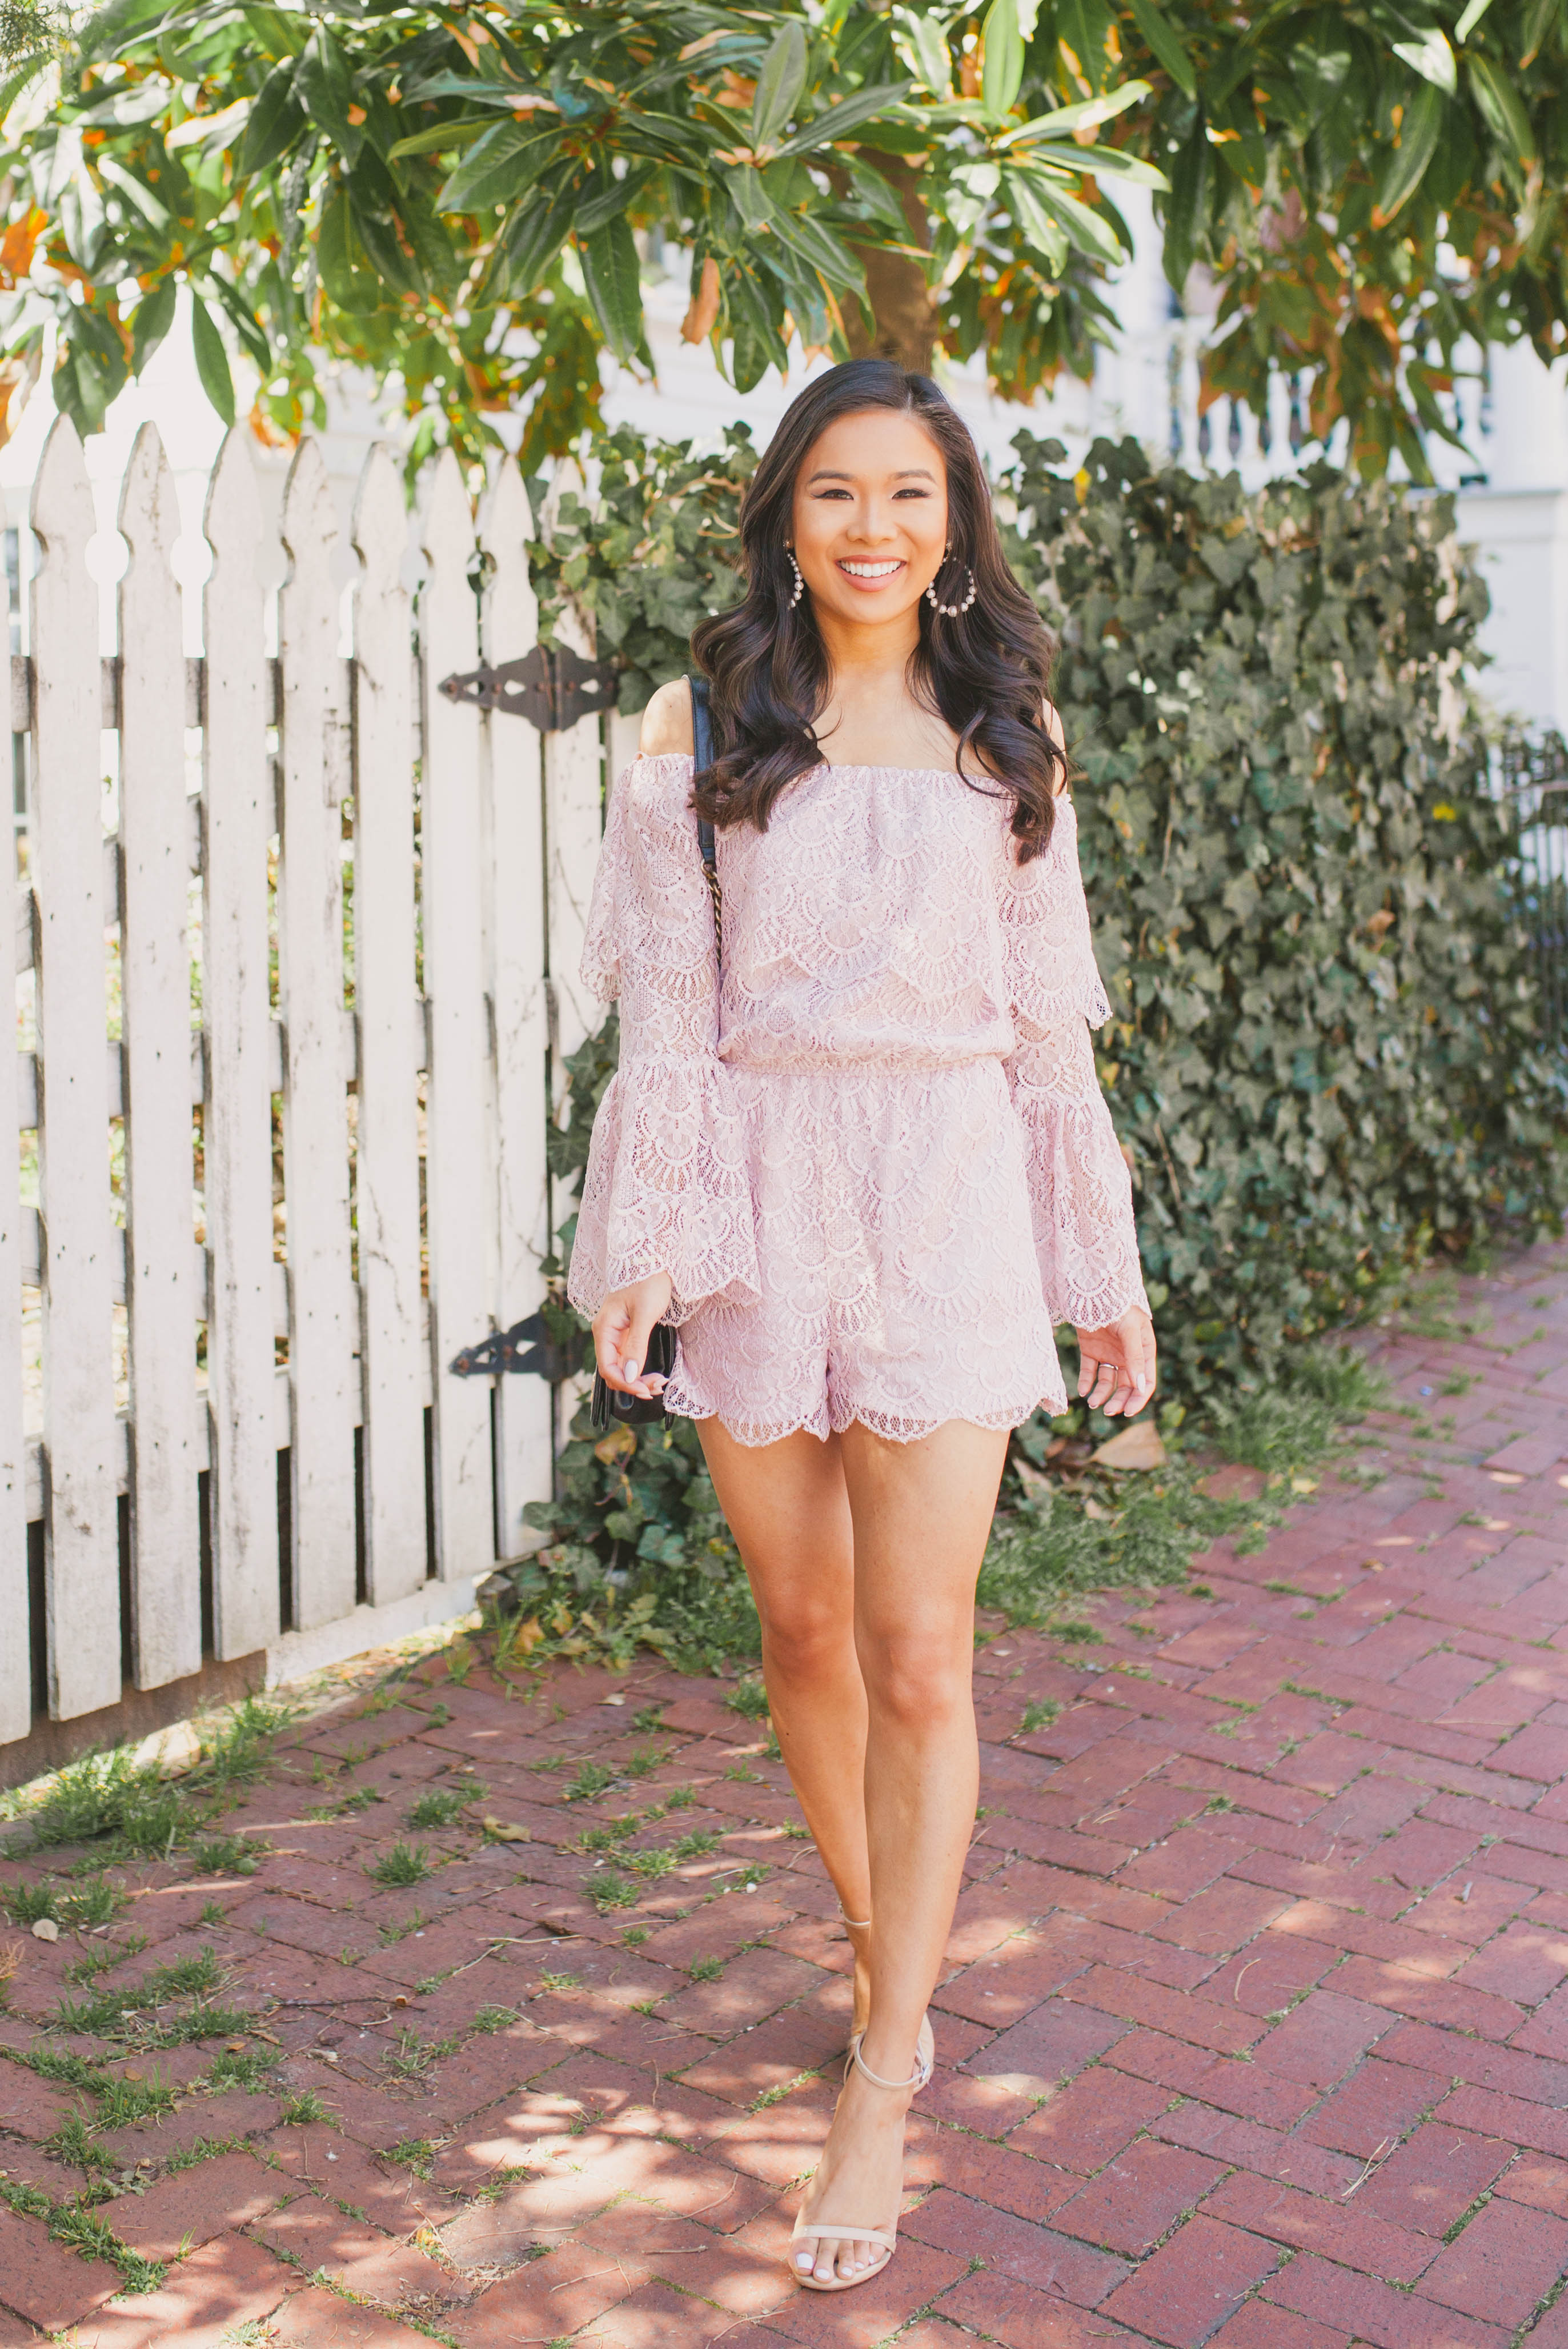 Hoang-Kim wears a blush lace off-the-shoulder romper with pearl hoop earrings